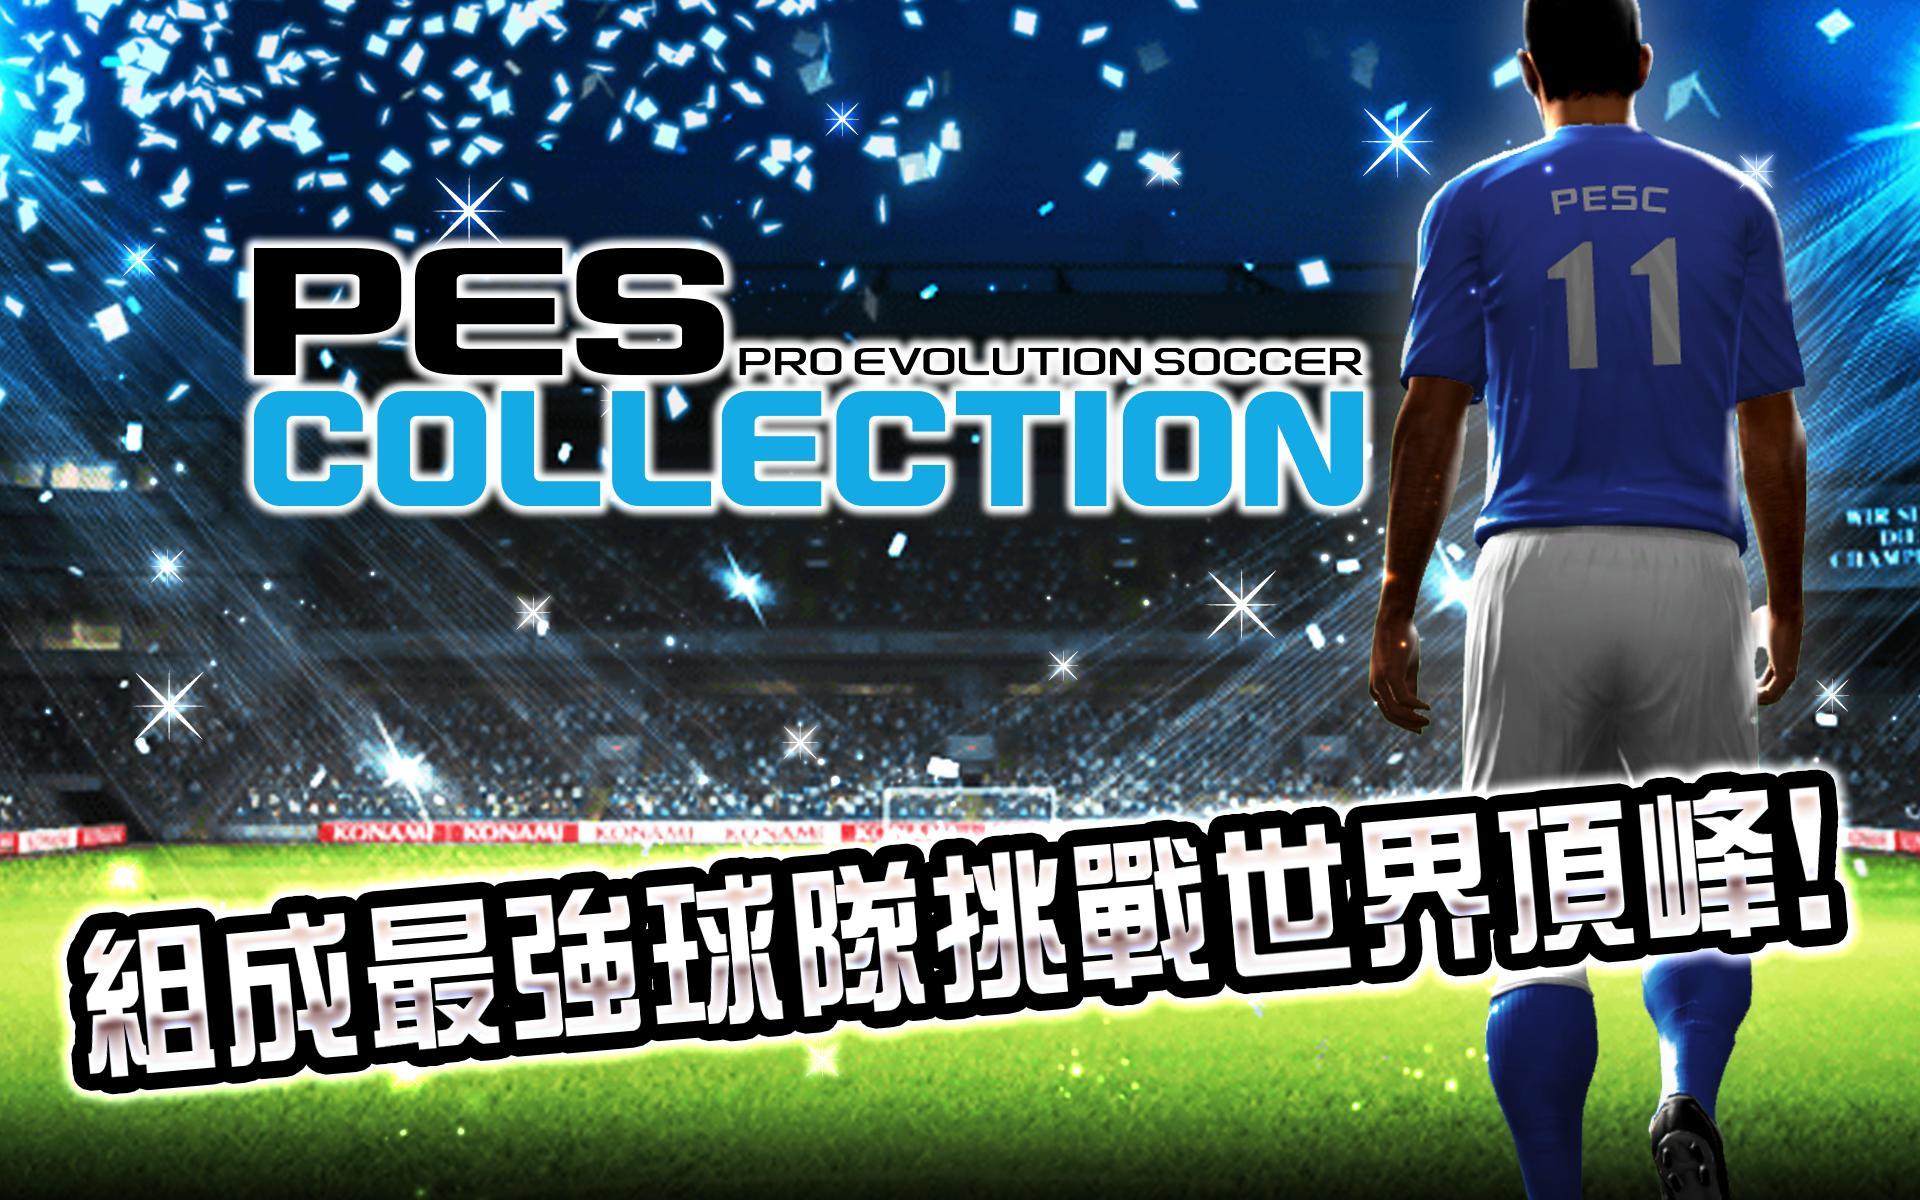 Screenshot of PES COLLECTION